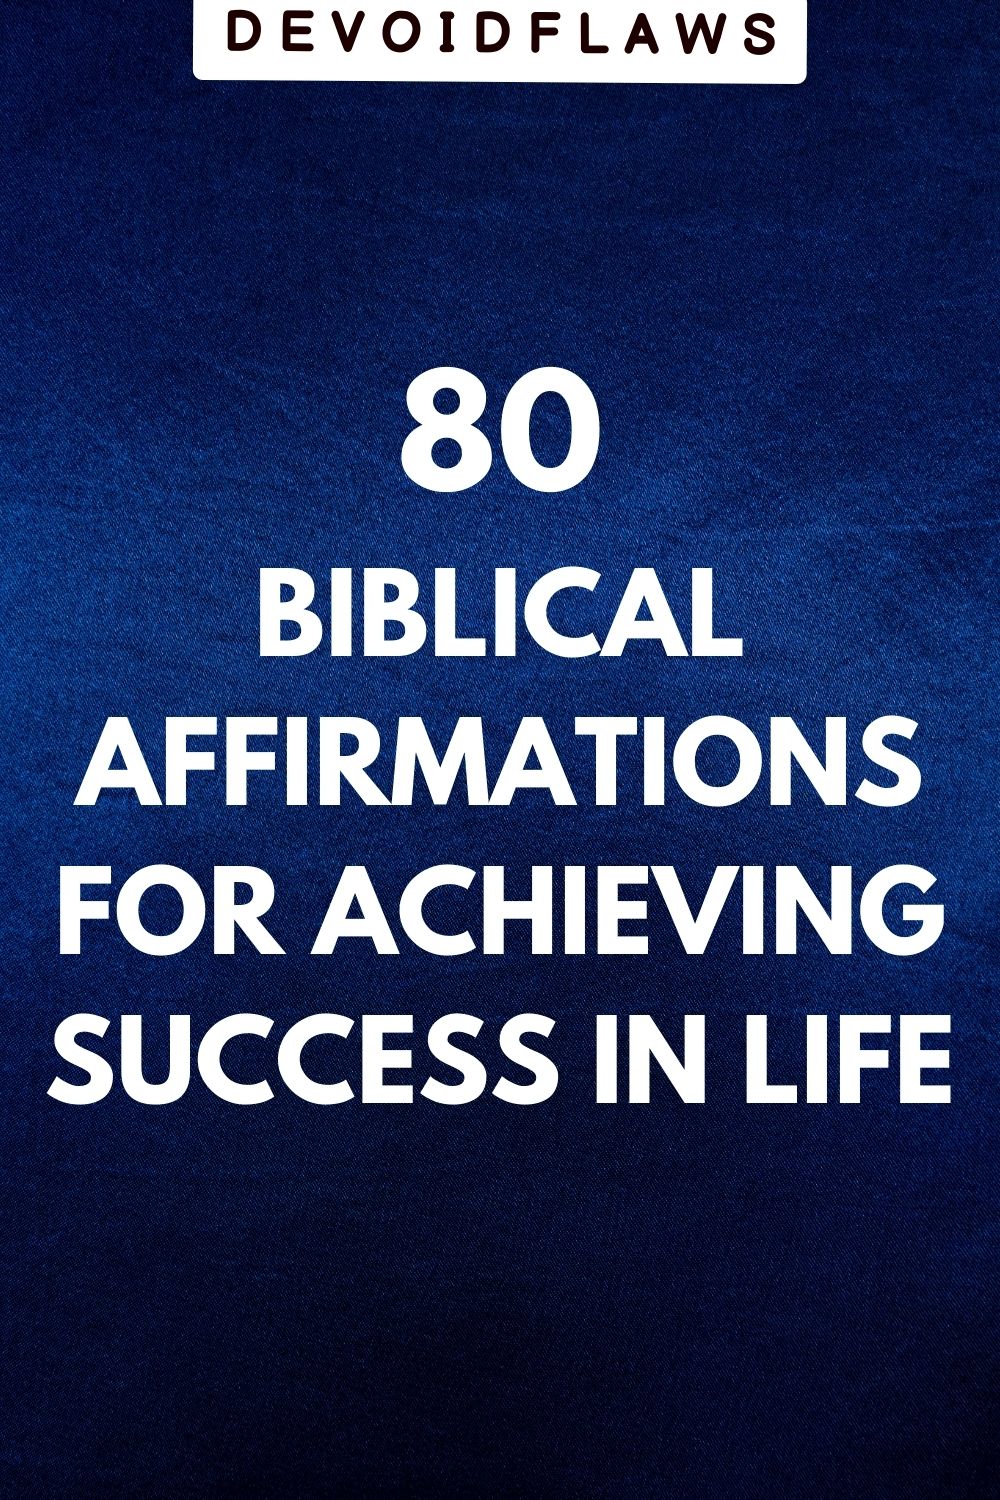 image with text - 80 biblical affirmations for achieving success in life